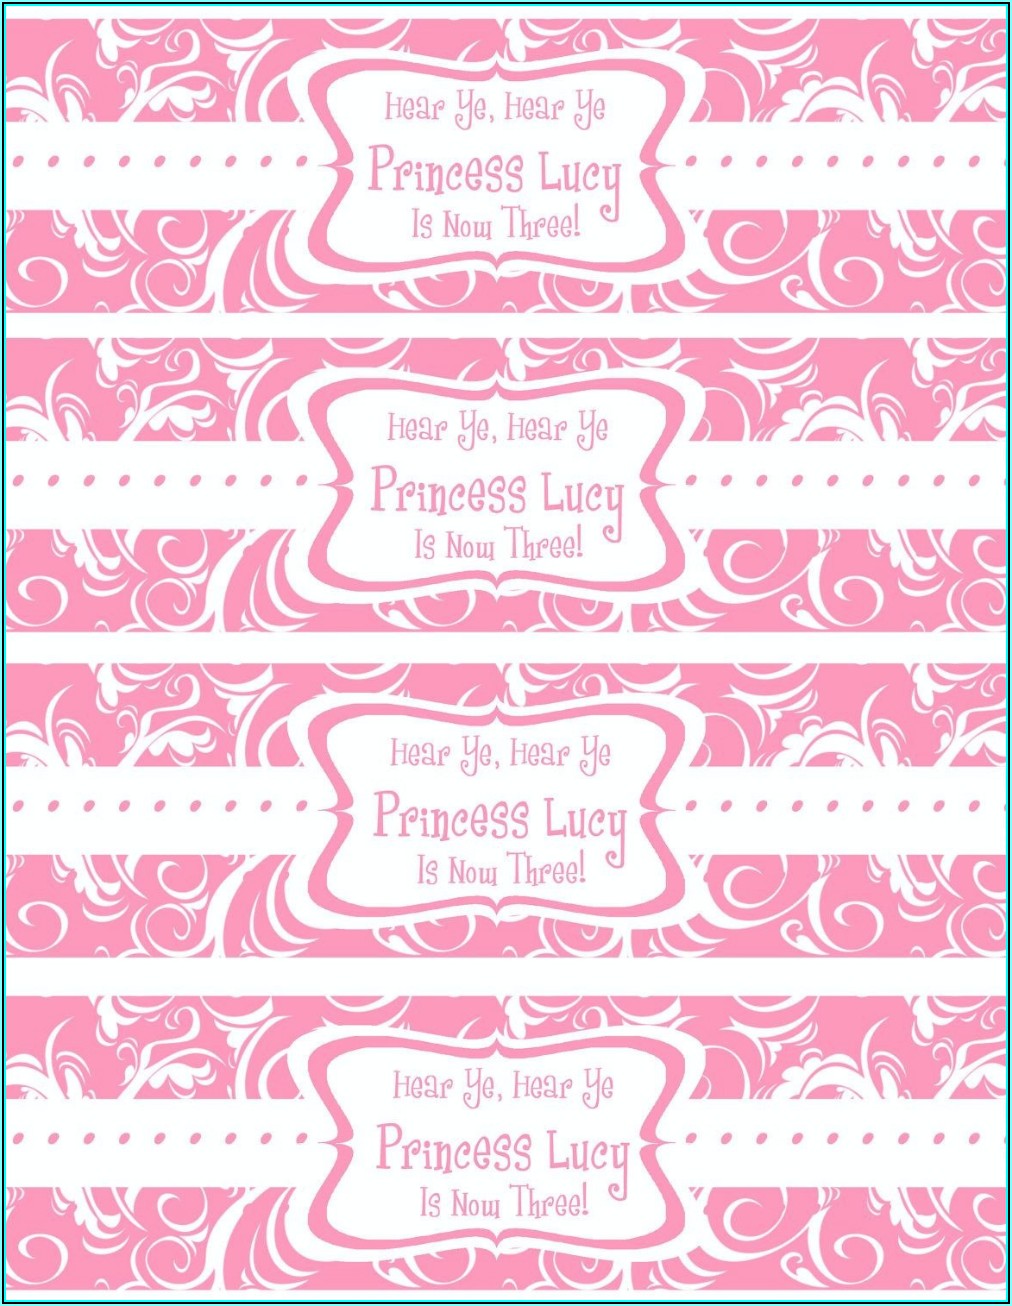 Water Bottle Labels Template Free